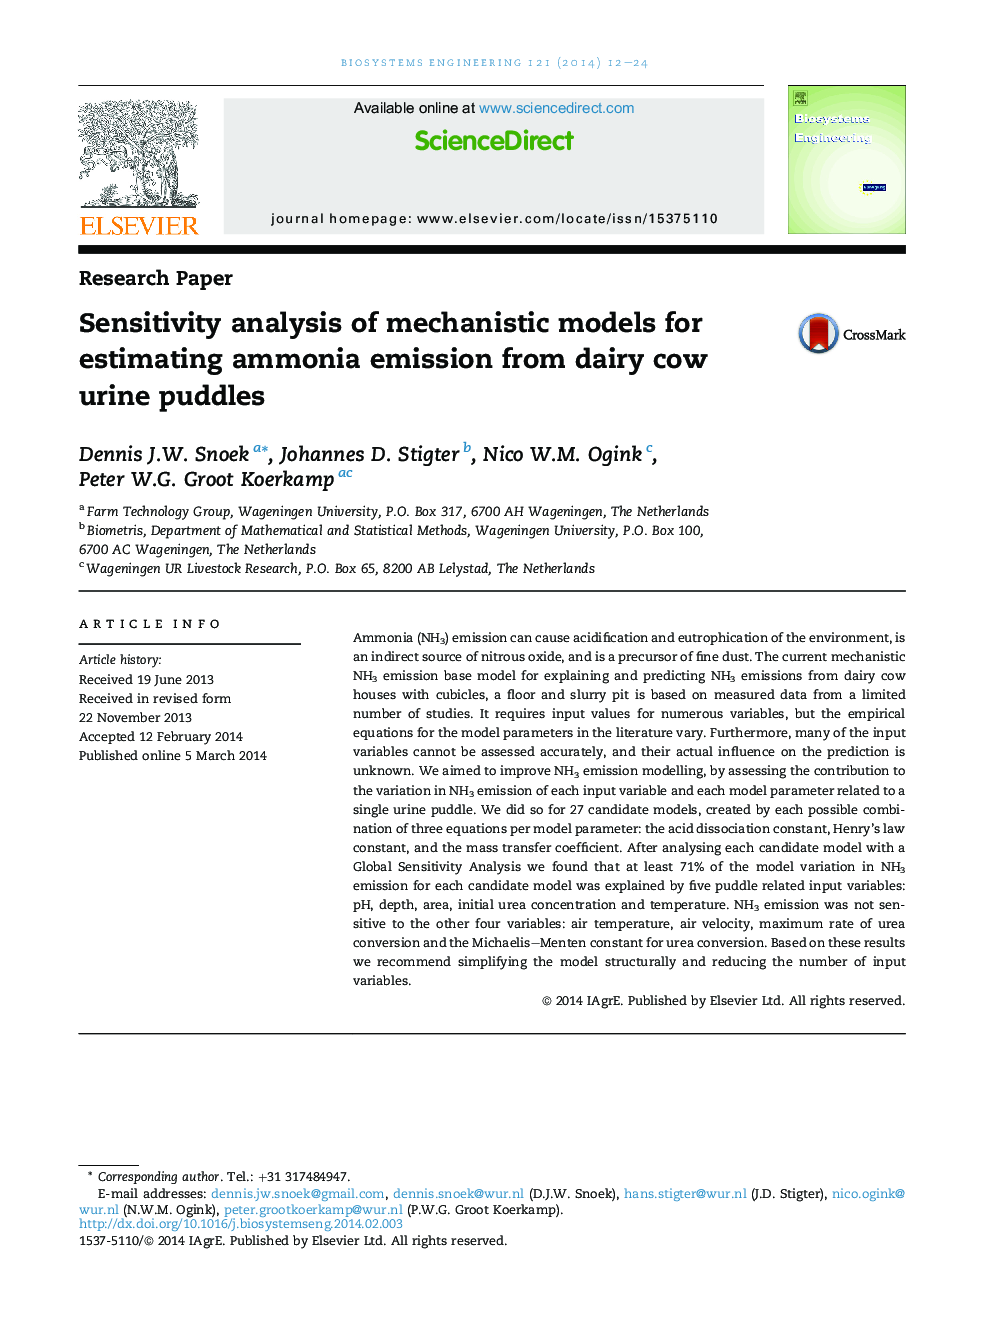 Sensitivity analysis of mechanistic models for estimating ammonia emission from dairy cow urine puddles